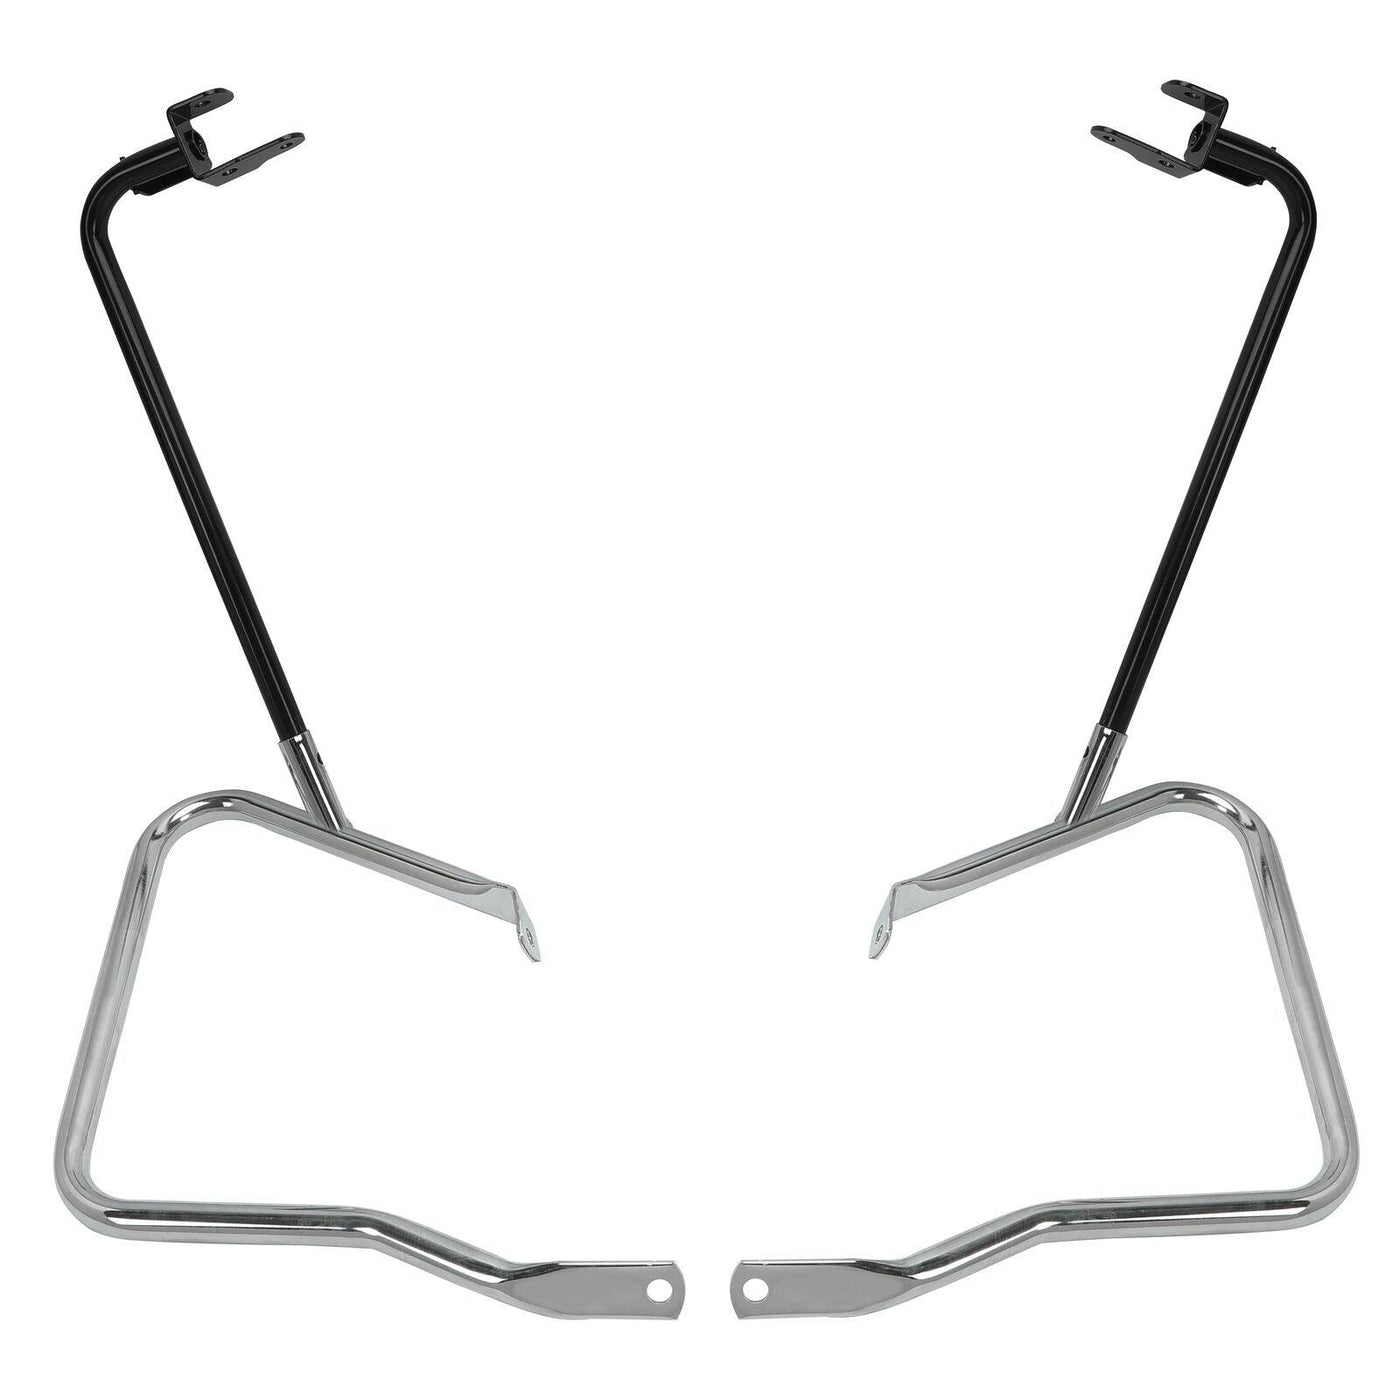 Rear Saddlebag Brackets Guard Bars Supports For 14-21 Harley Touring Models FLHX - Moto Life Products